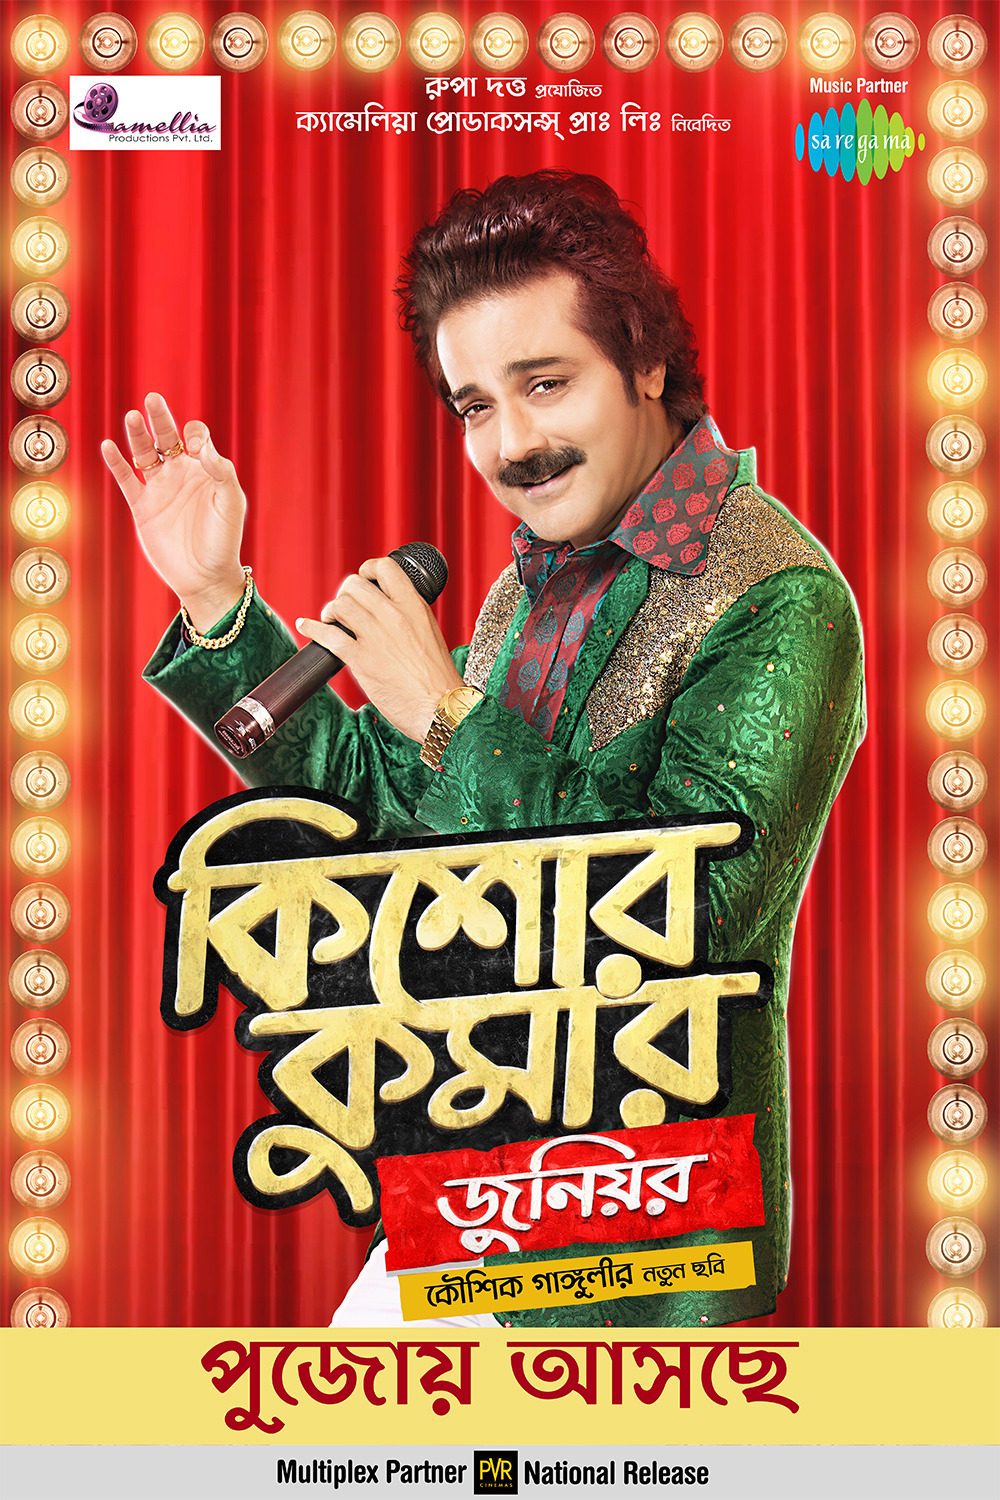 Extra Large Movie Poster Image for Kishore Kumar Junior (#2 of 5)